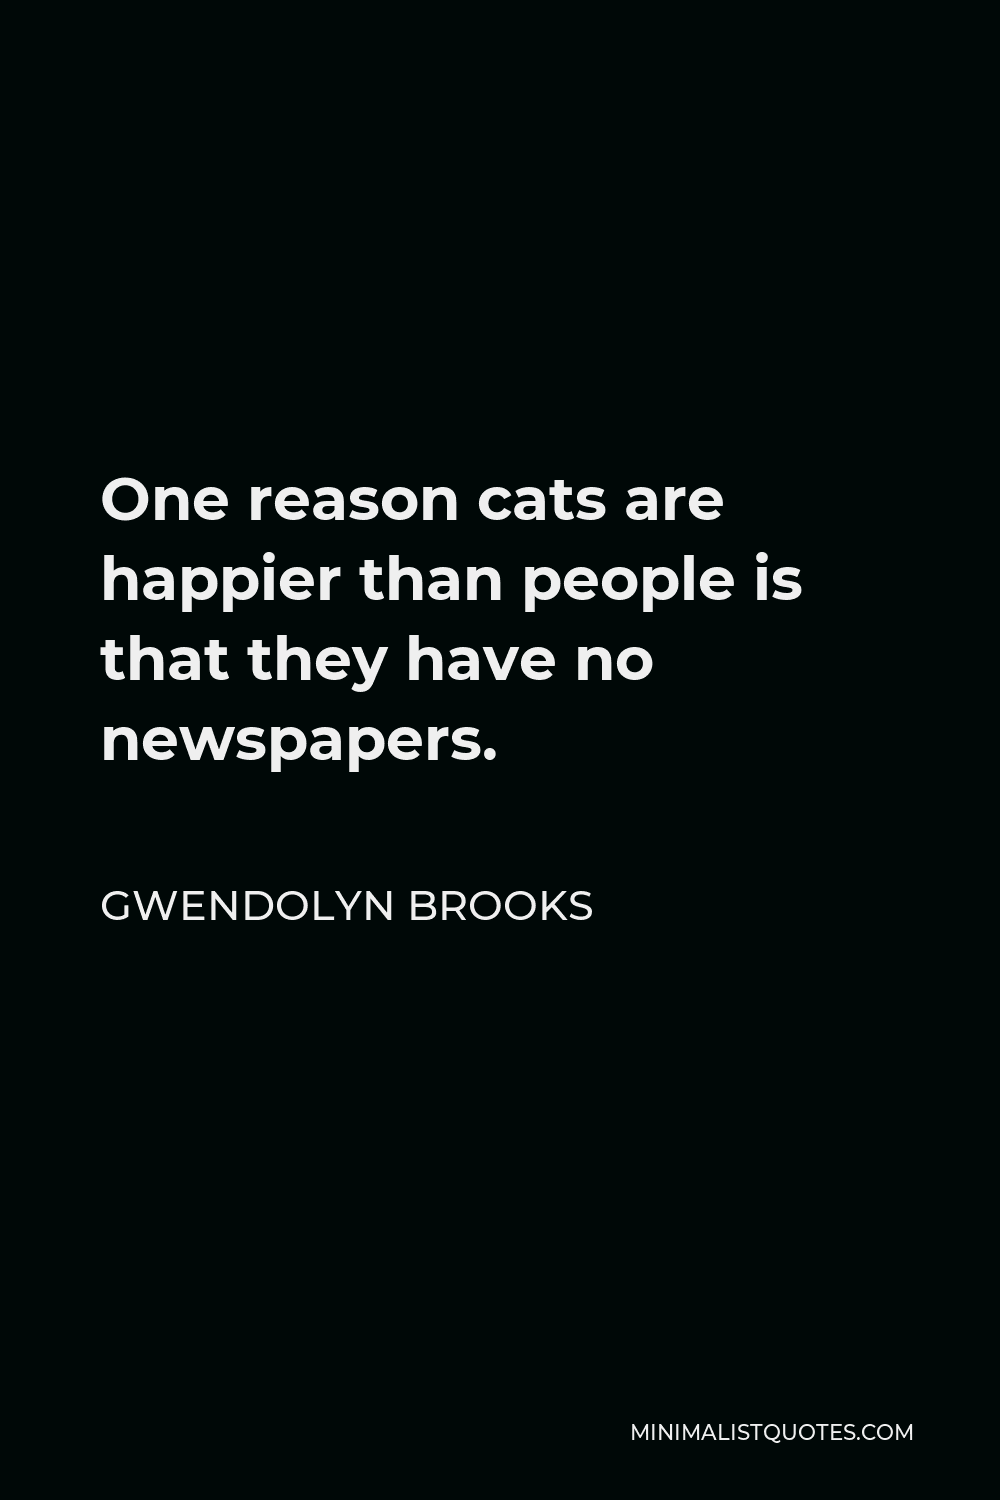 Gwendolyn Brooks Quote - One reason cats are happier than people is that they have no newspapers.